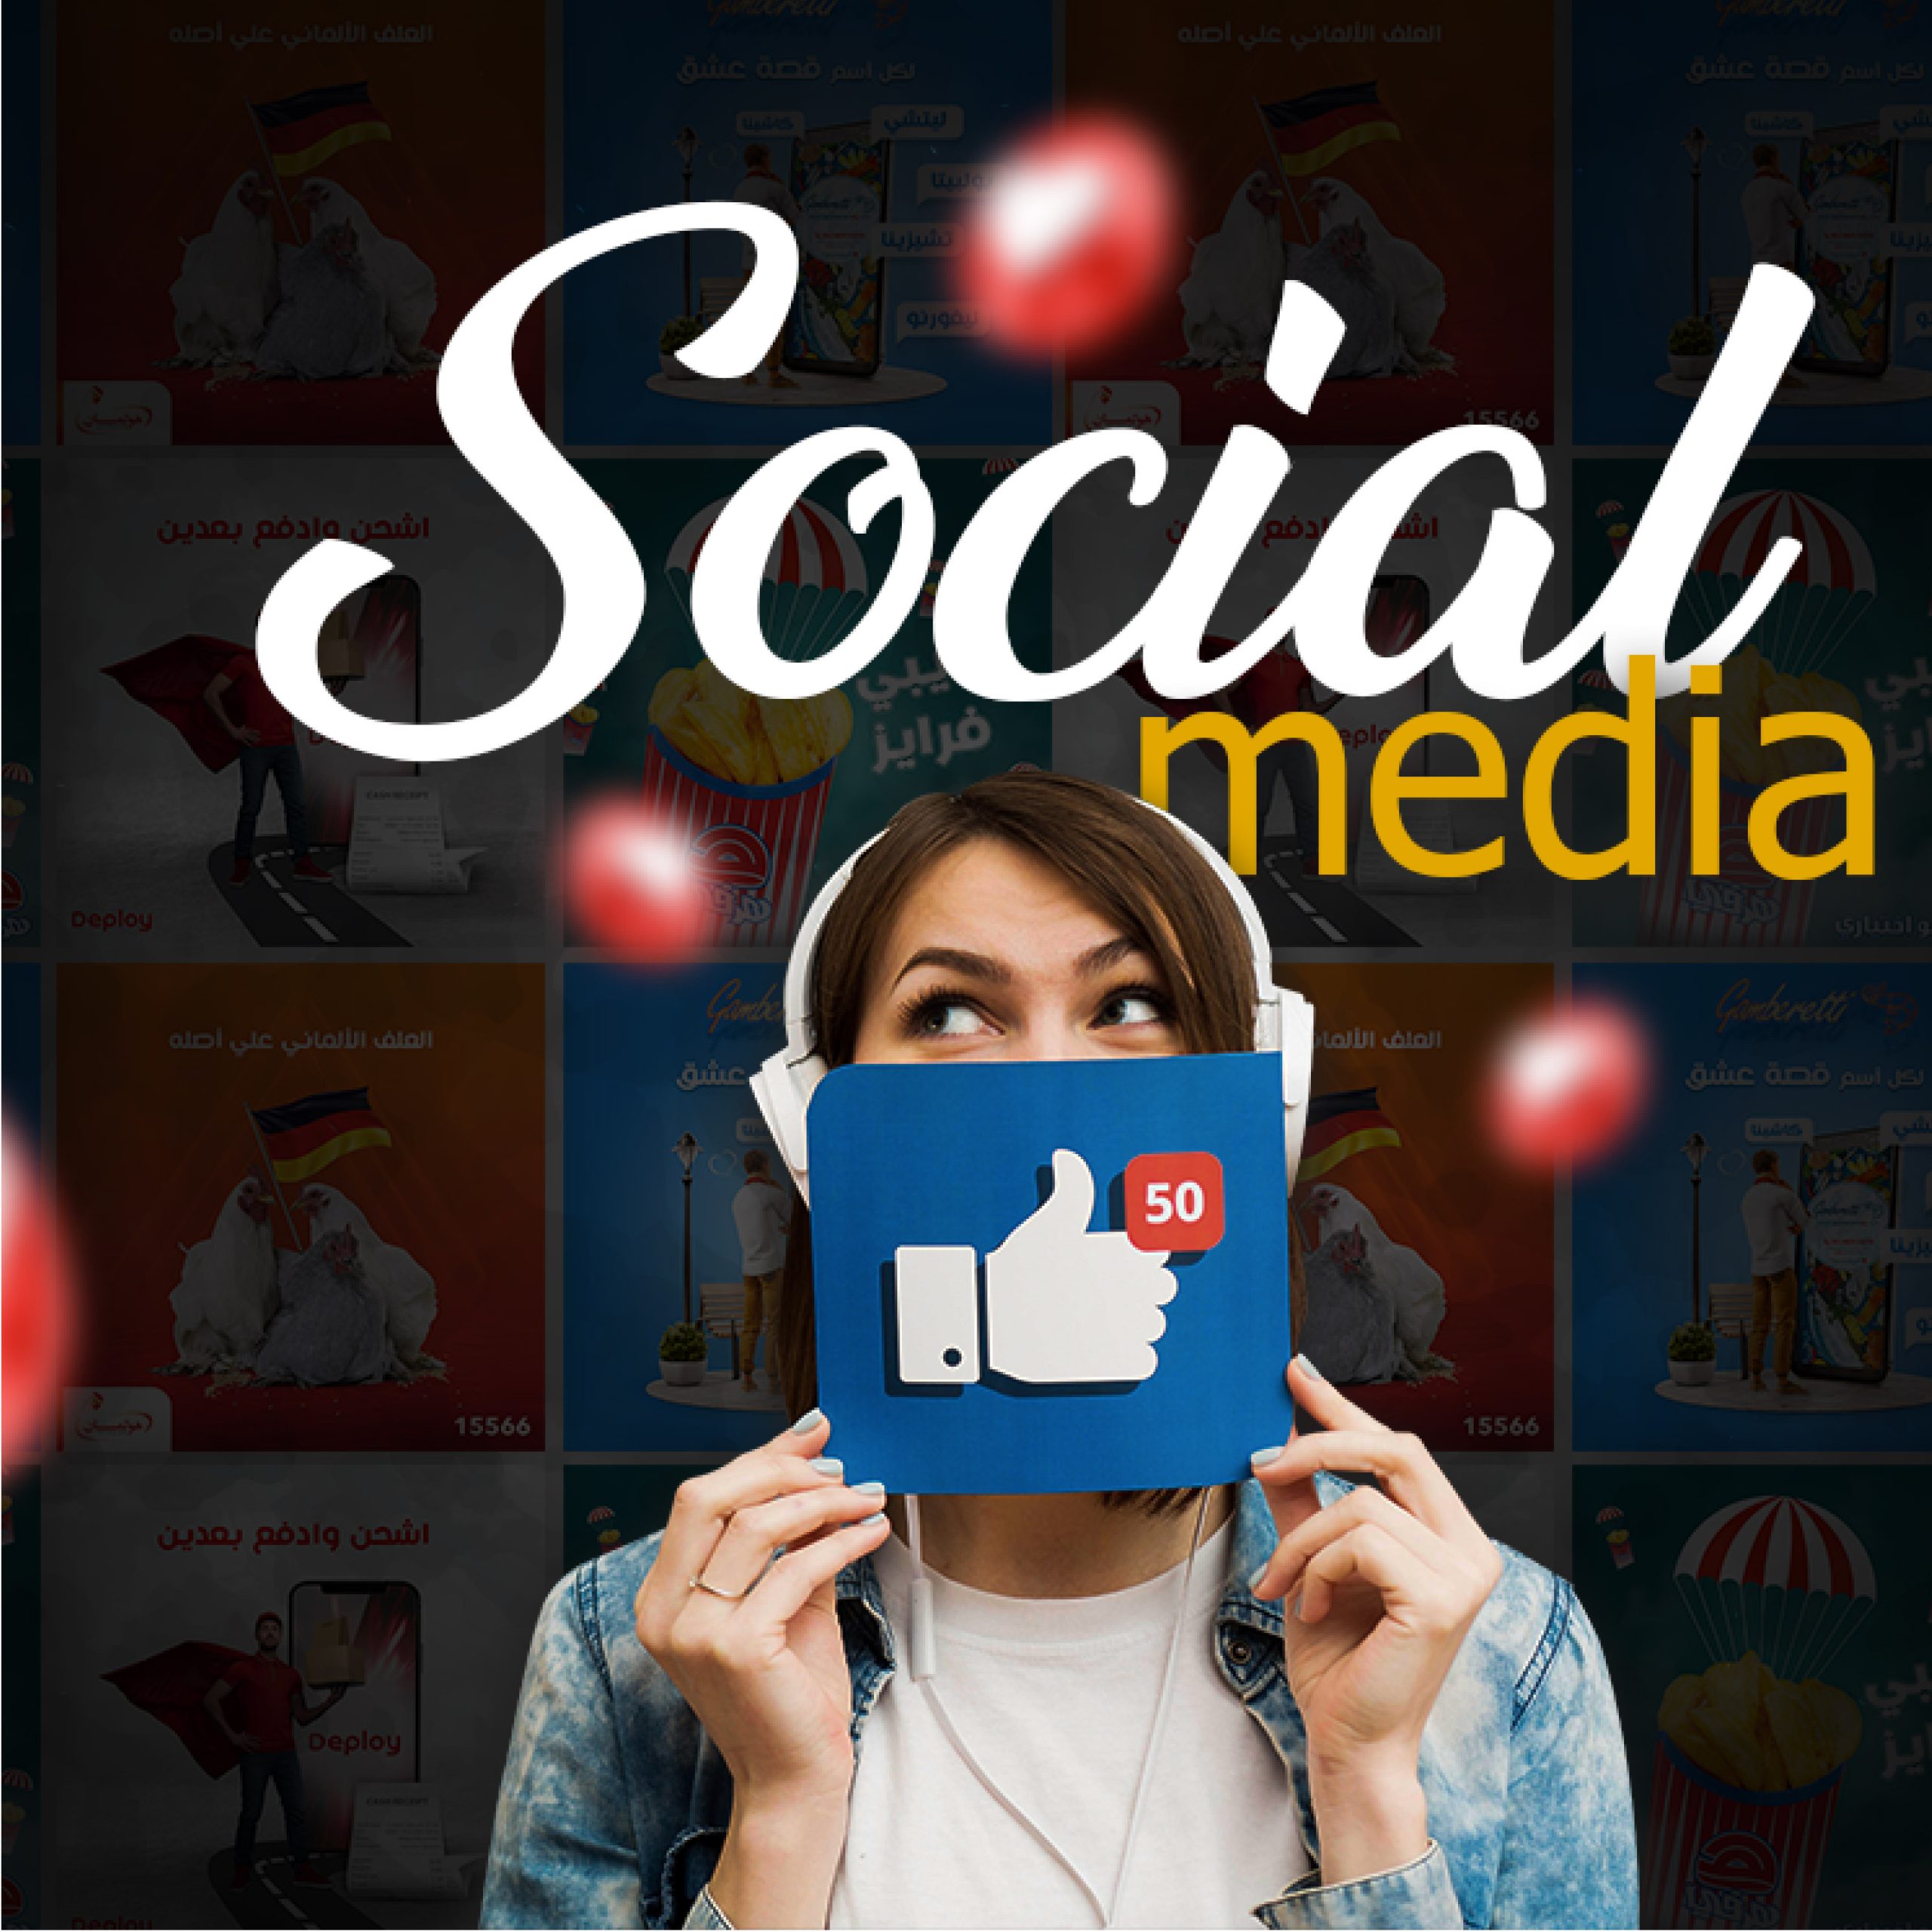 Why Social Media Marketing is Important for Small Businesses